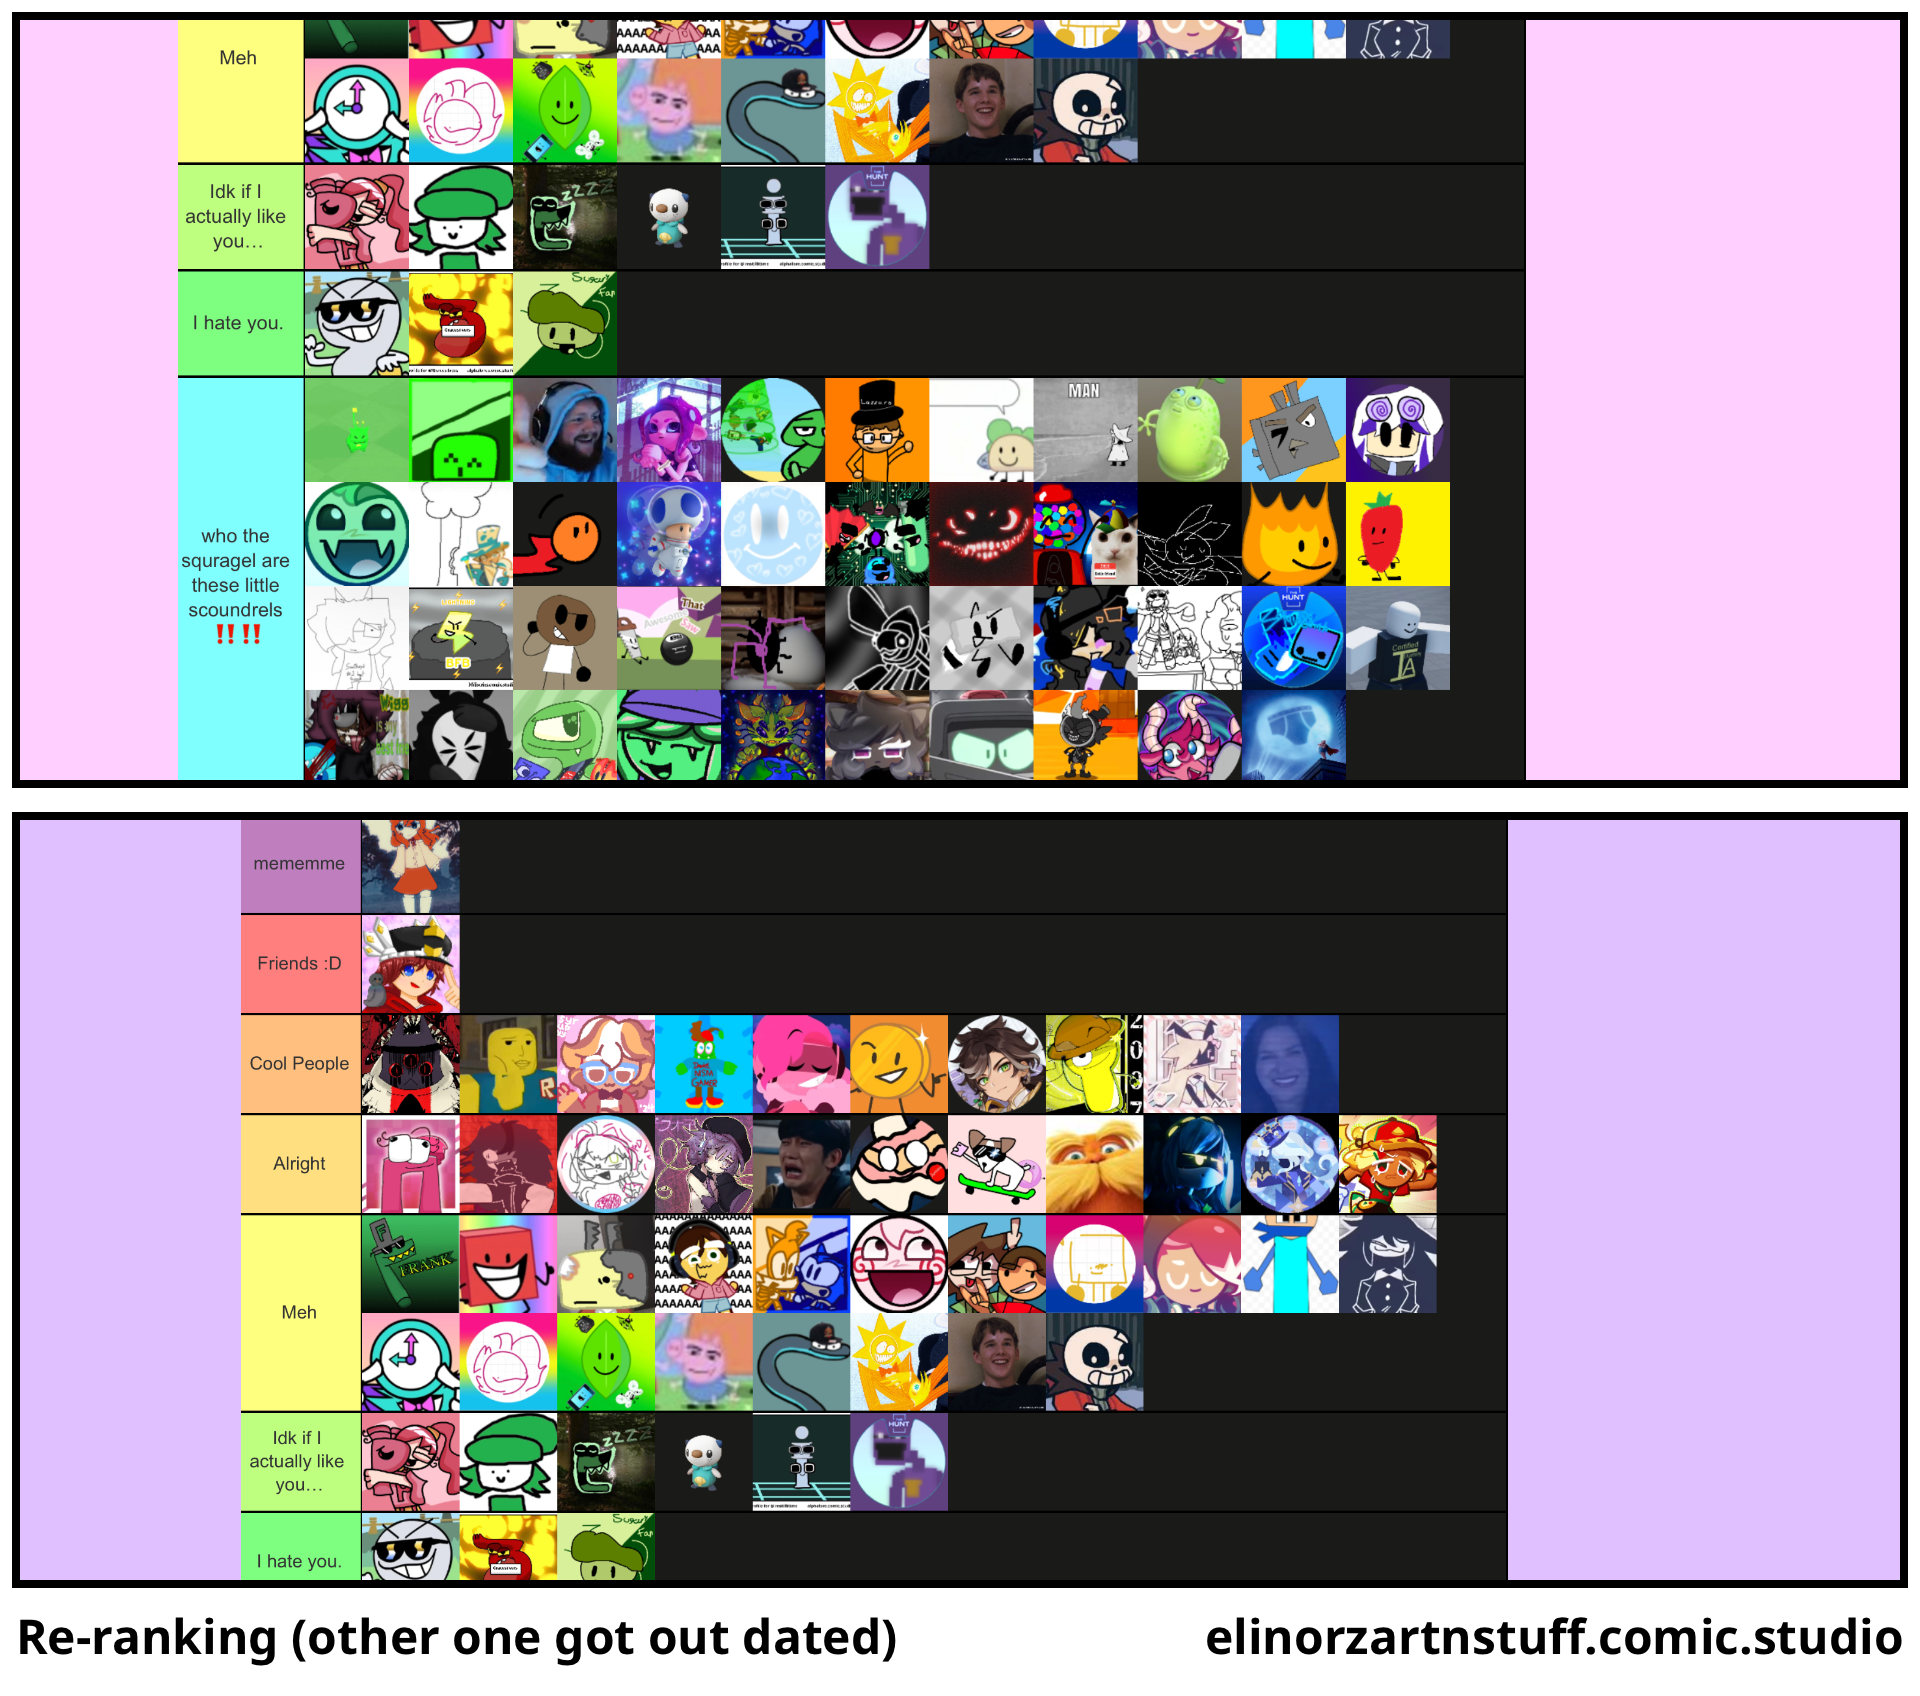 Re-ranking (other one got out dated)